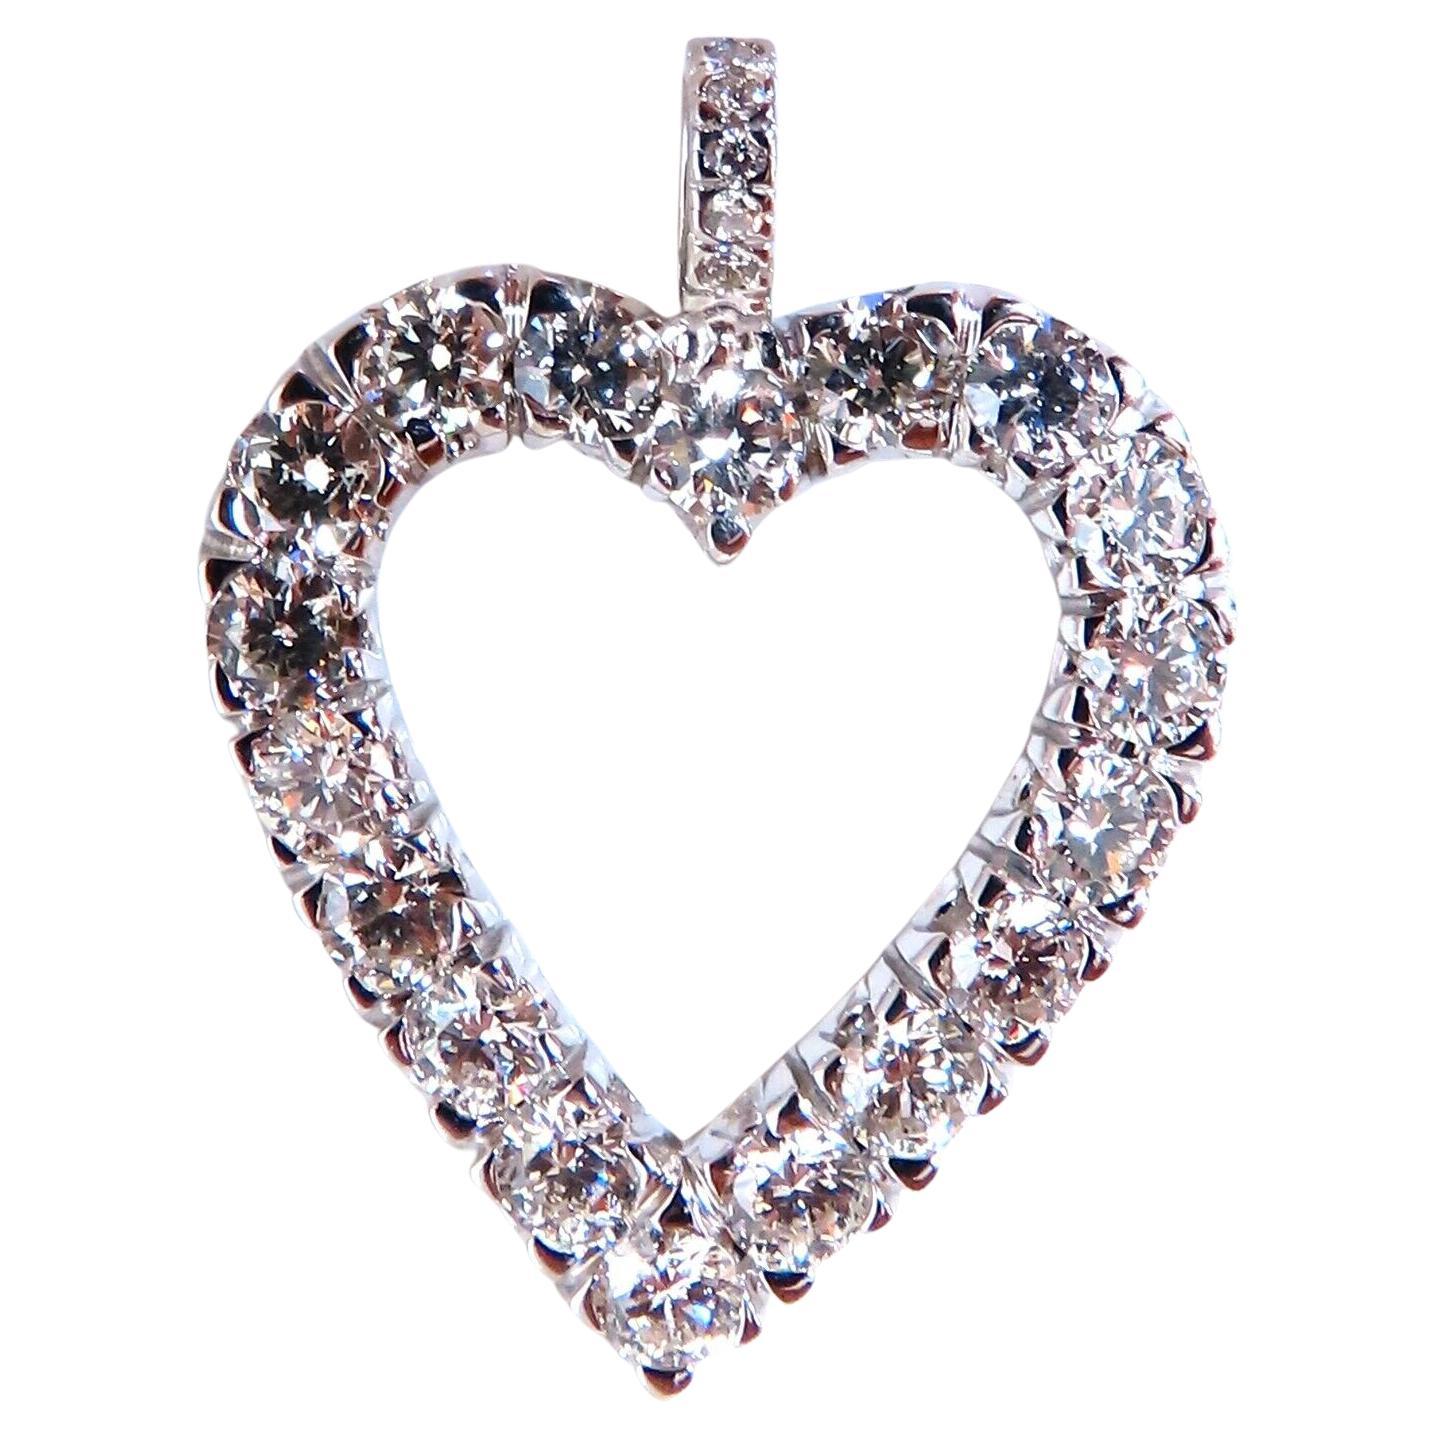 2.72ct natural diamonds open heart necklace 14kt g/vs For Sale